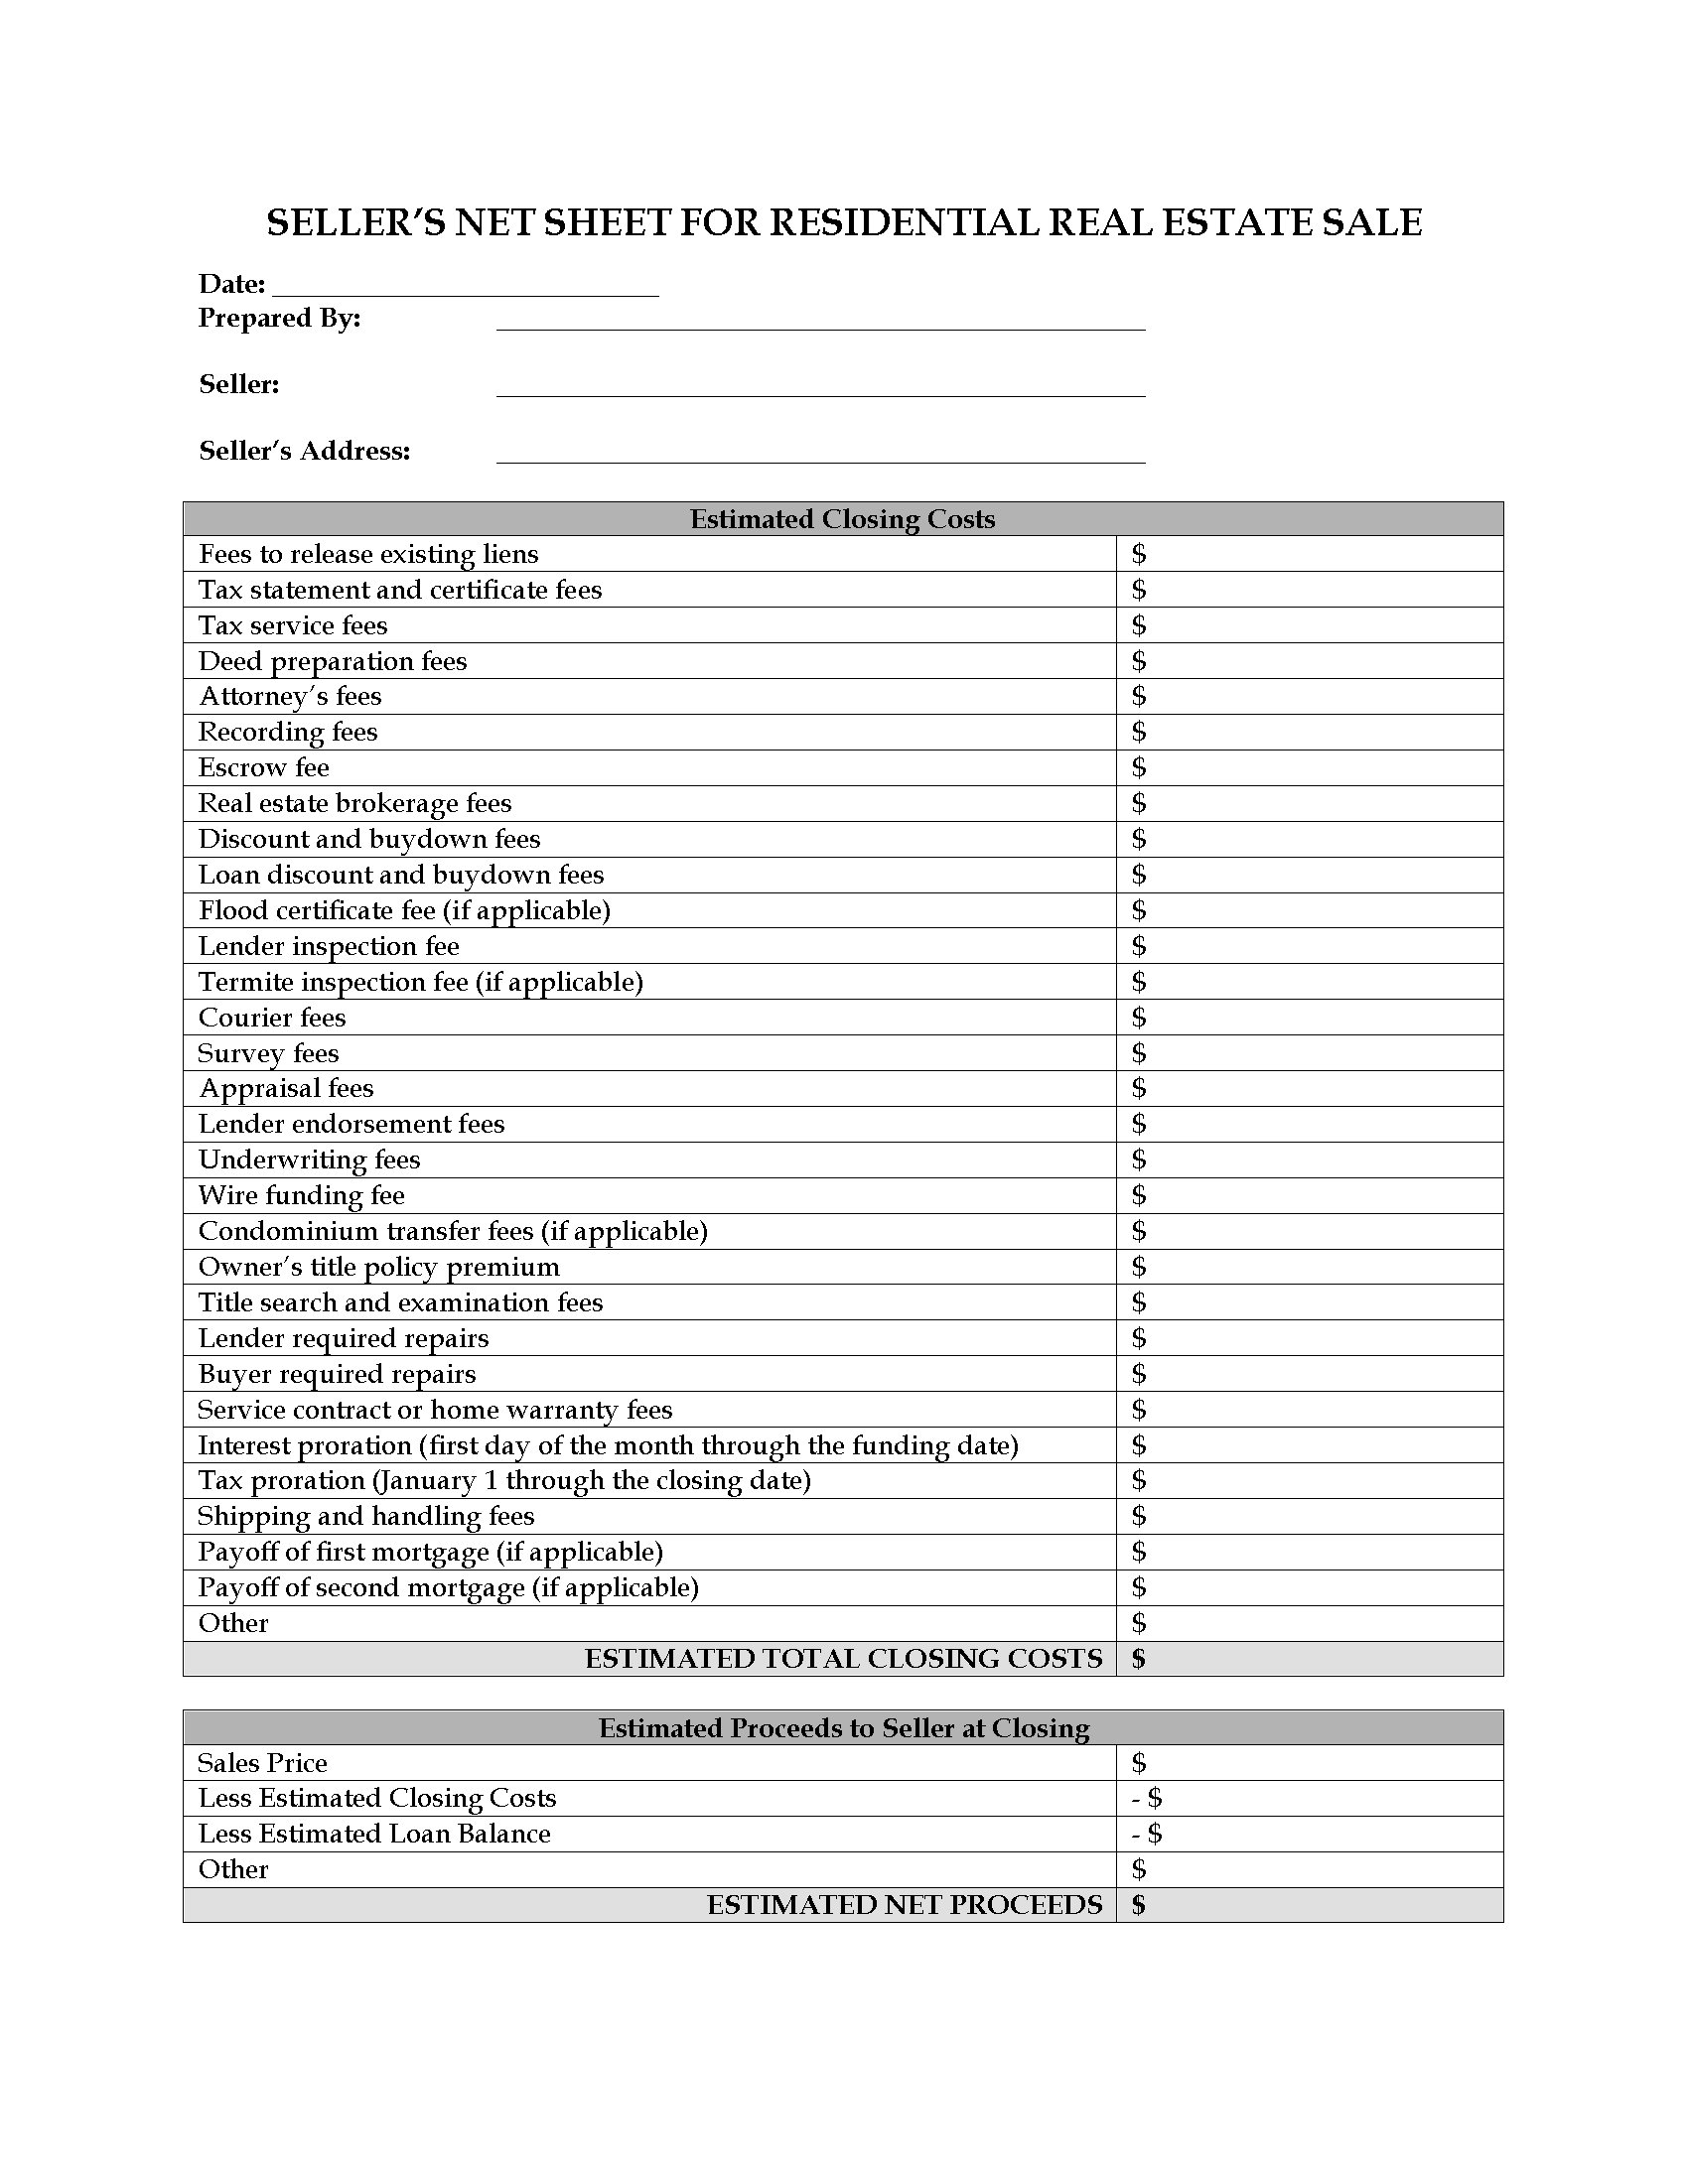 USA Seller's Net Sheet for Real Estate Sale Legal Forms and Business